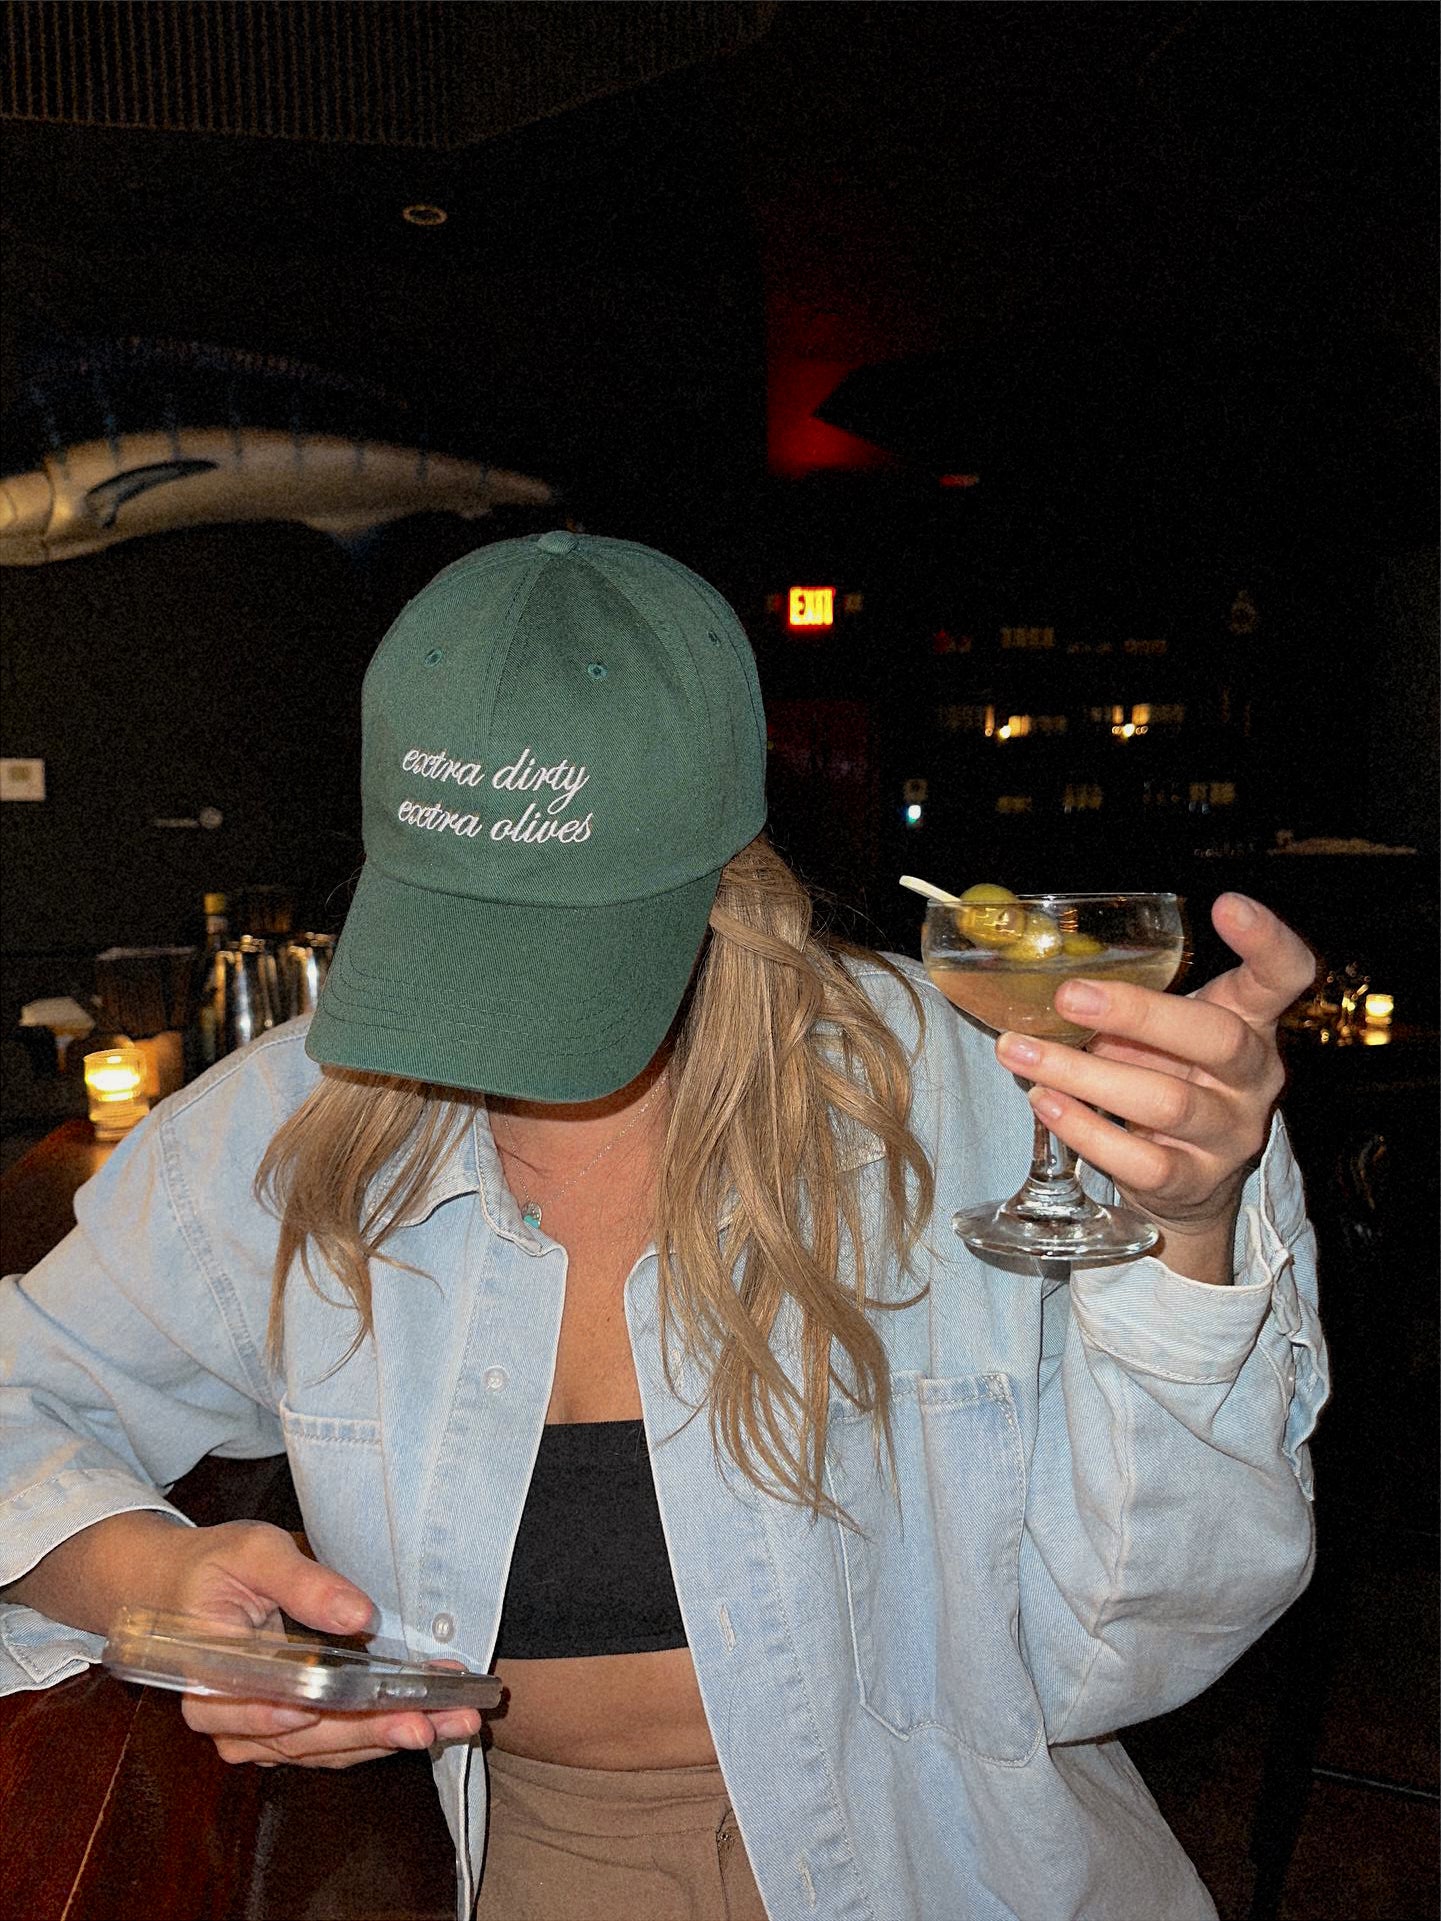 Olive Dad Hat with LV Patch